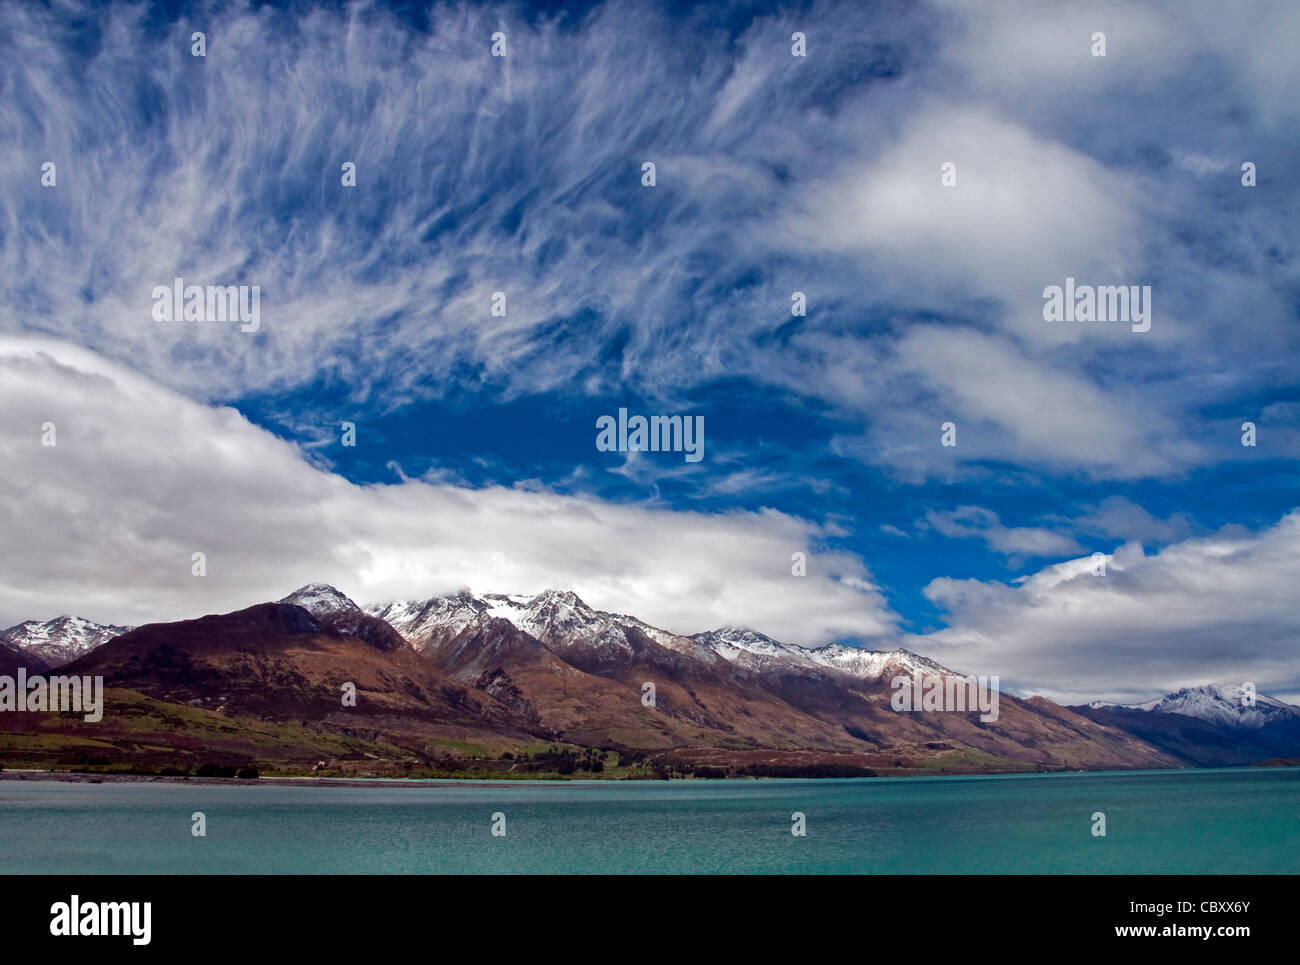 Clouds in early spring over Lake Wakatipu and the mountains near Queenstown, New Zealand. Stock Photo